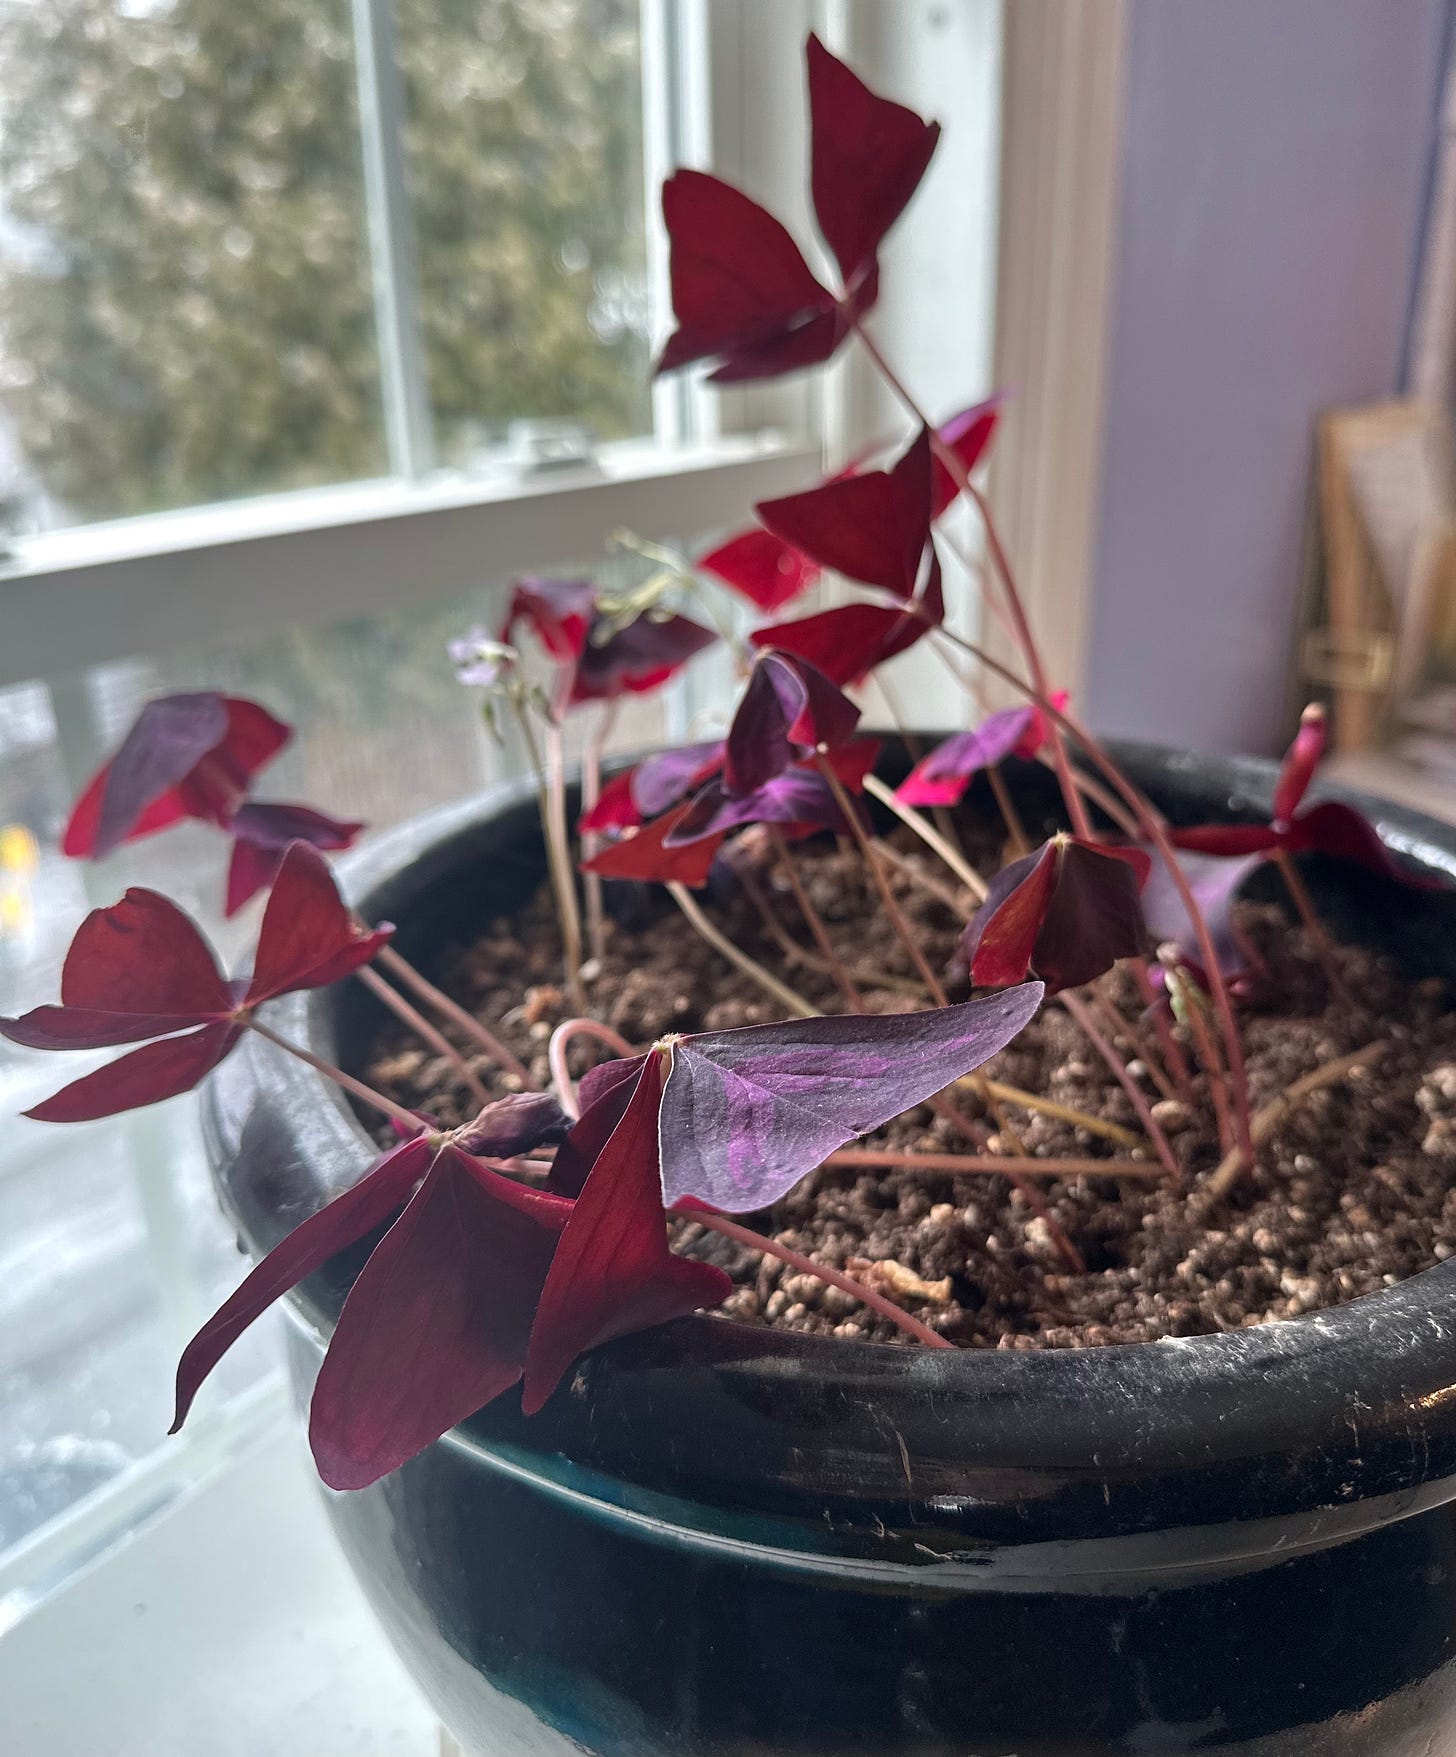 A purple oxalis clover in a black clay pot sitting by a window.